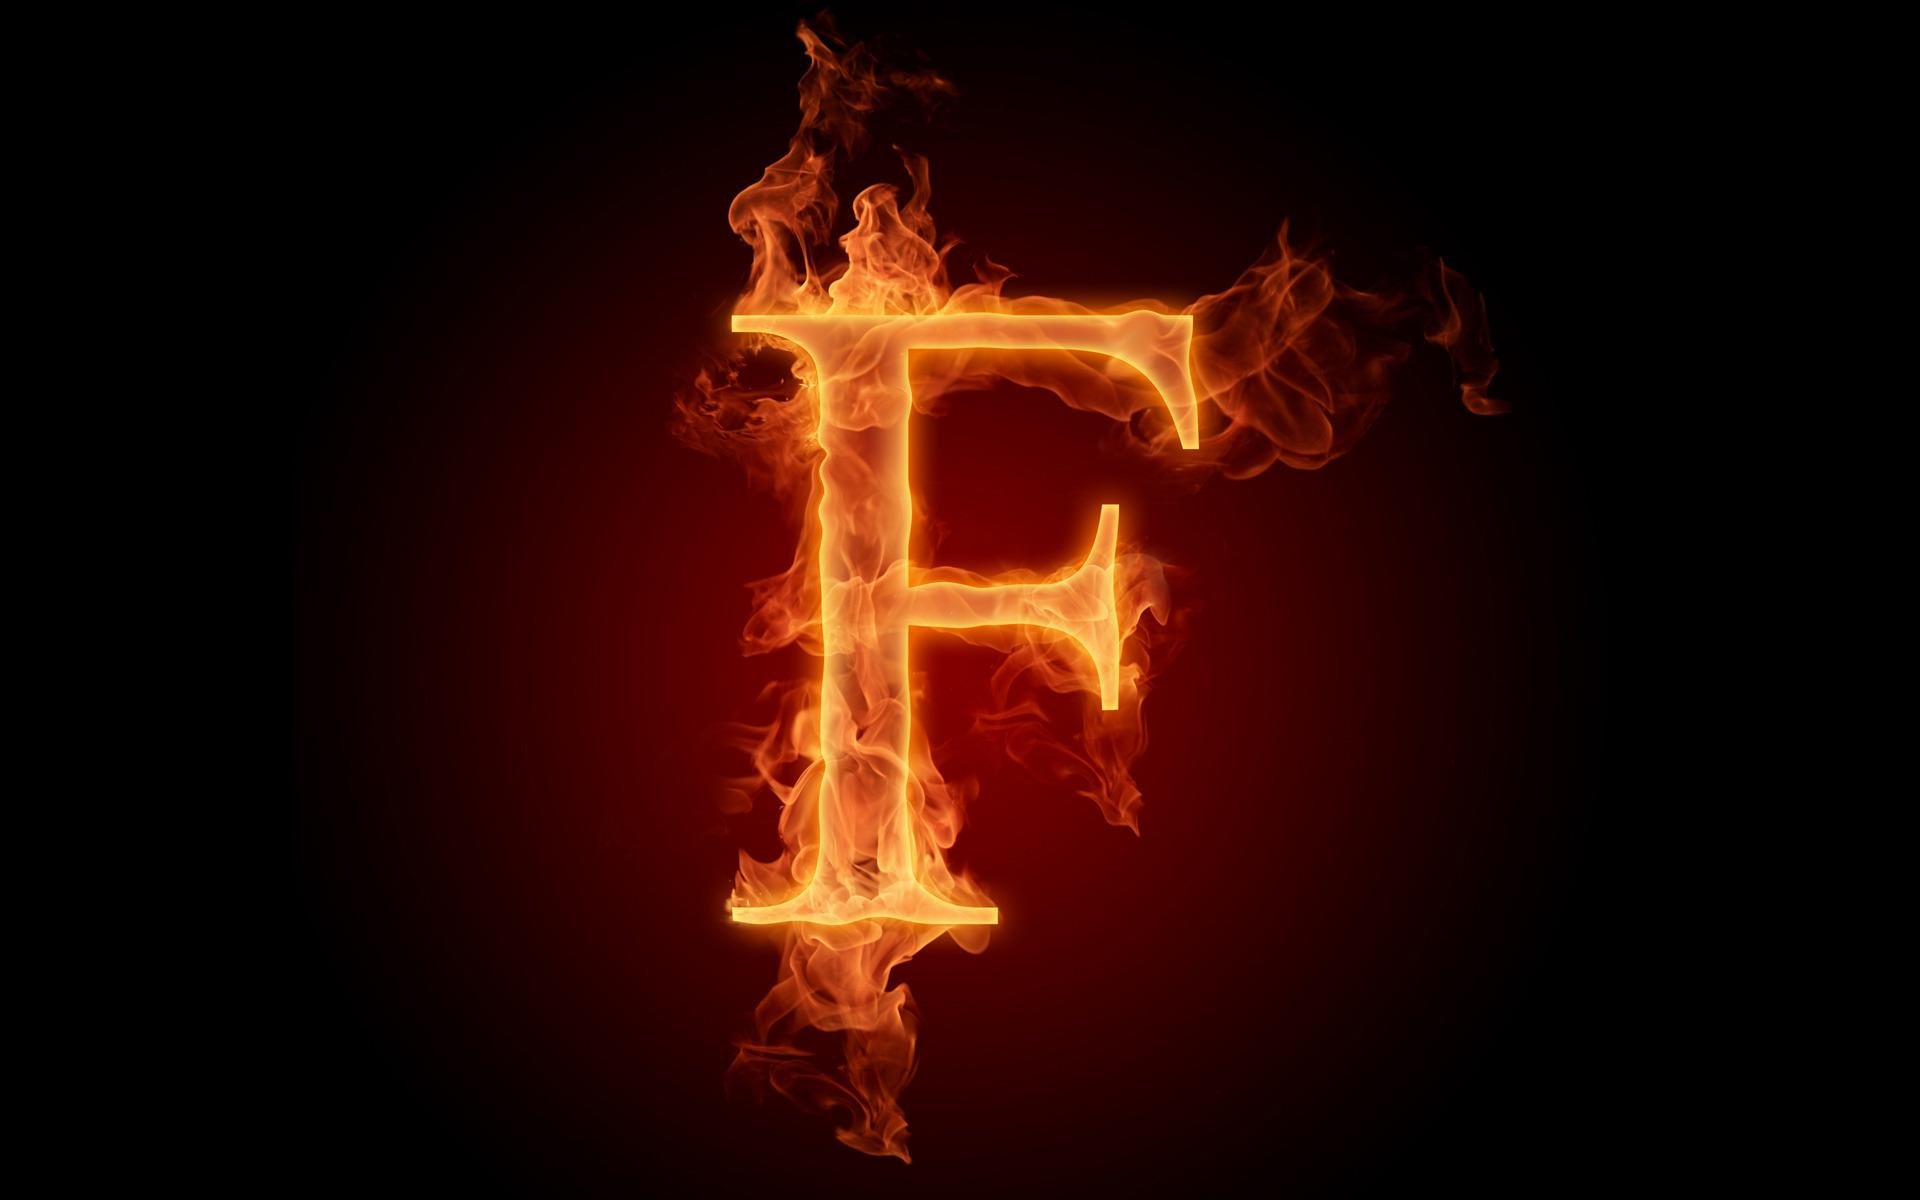 the fiery english alphabet picture f, 1920x1200 Wallpaper